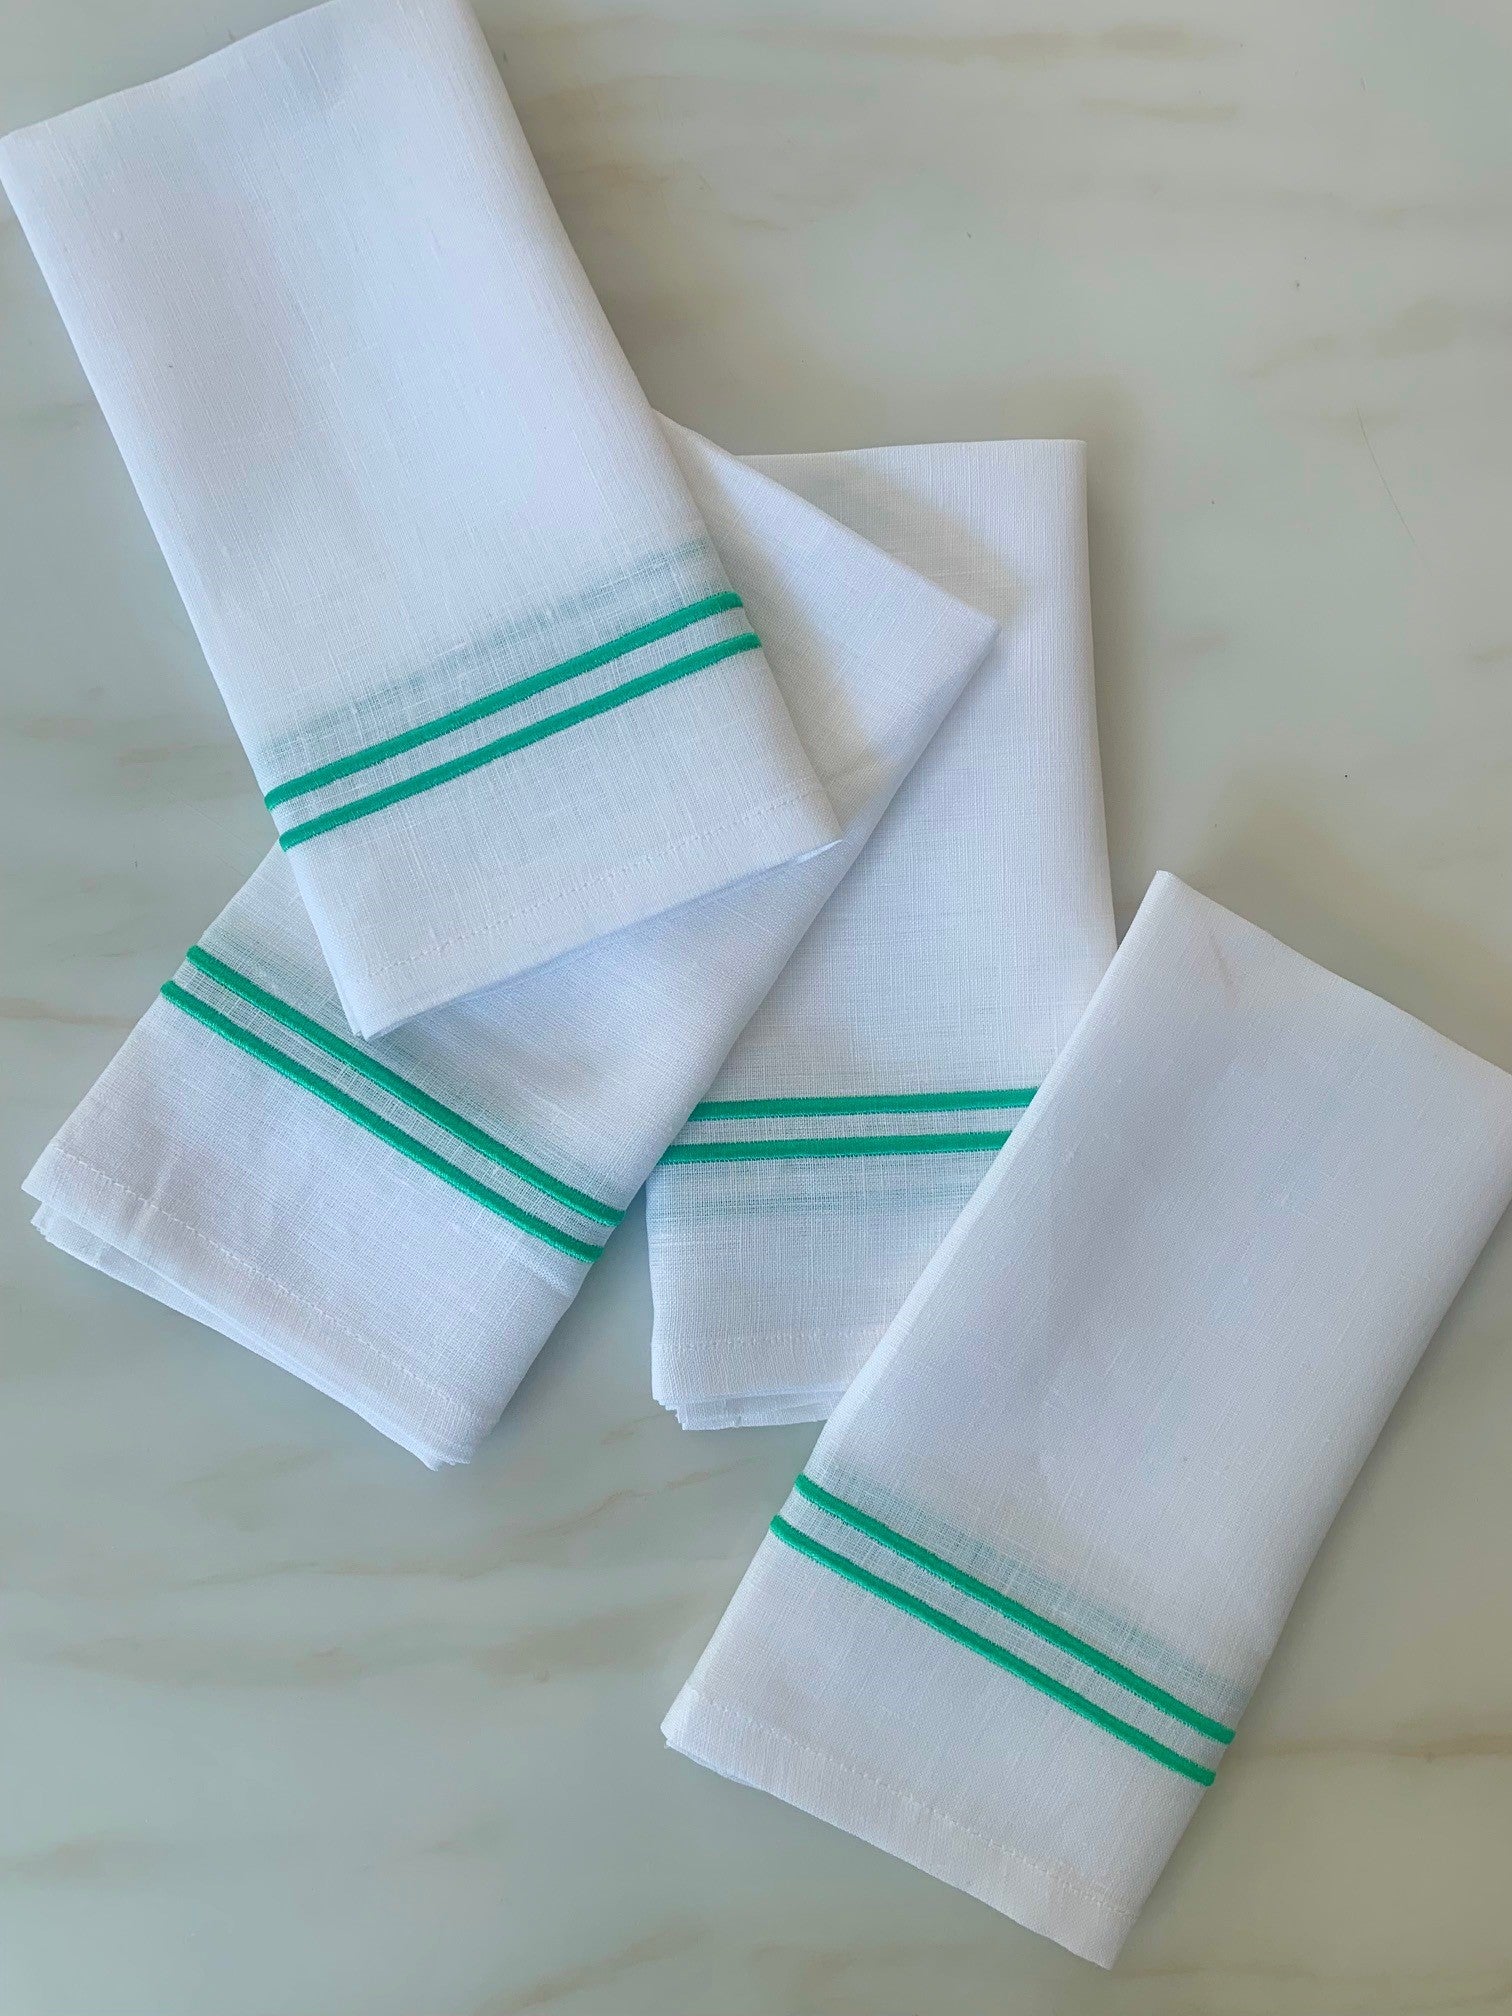 white linen napkins with double piping in green.